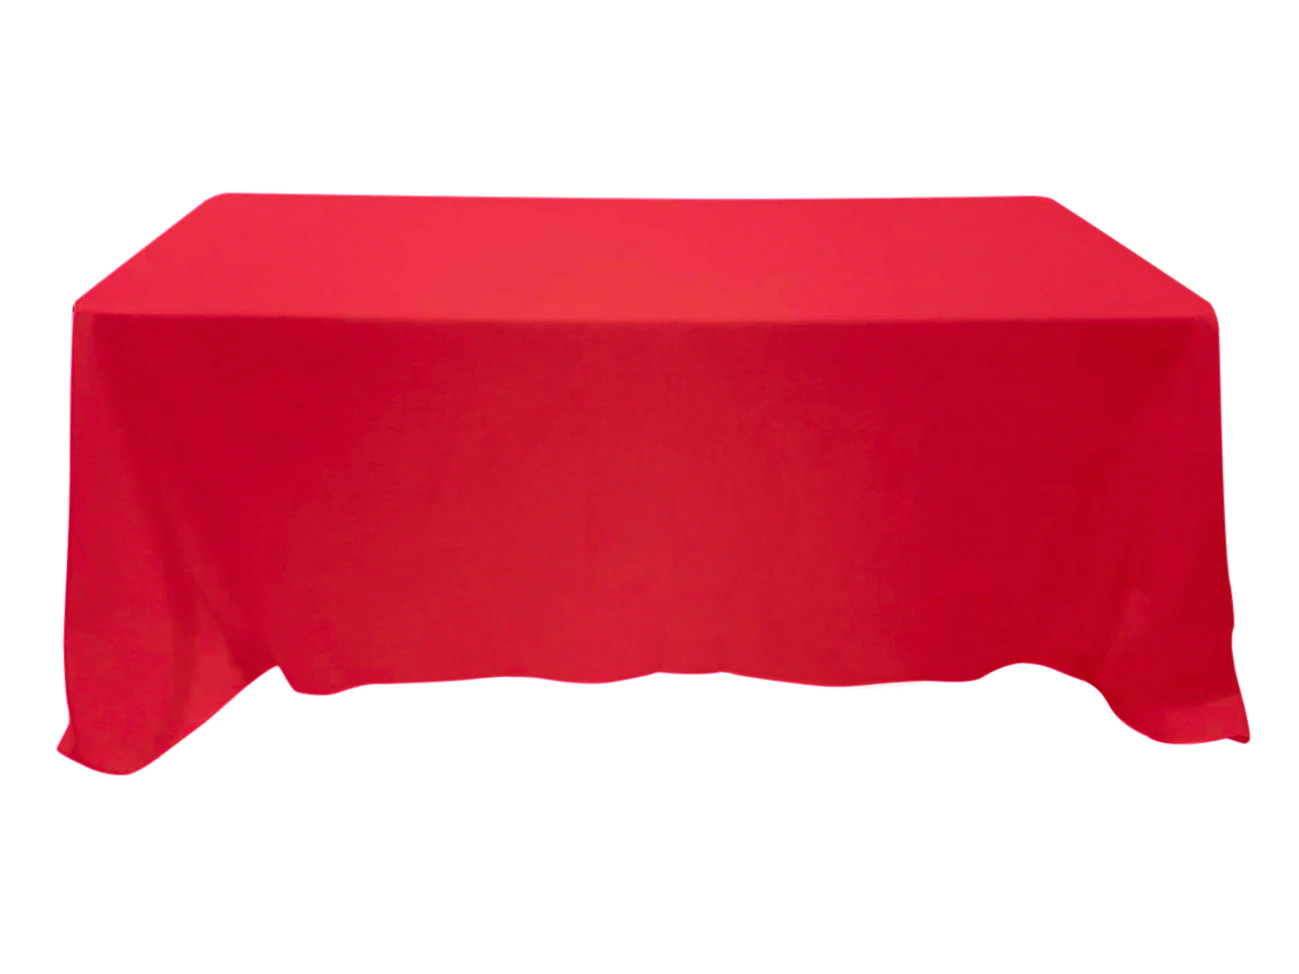 What Table Size Fits A 90×156 Tablecloth?